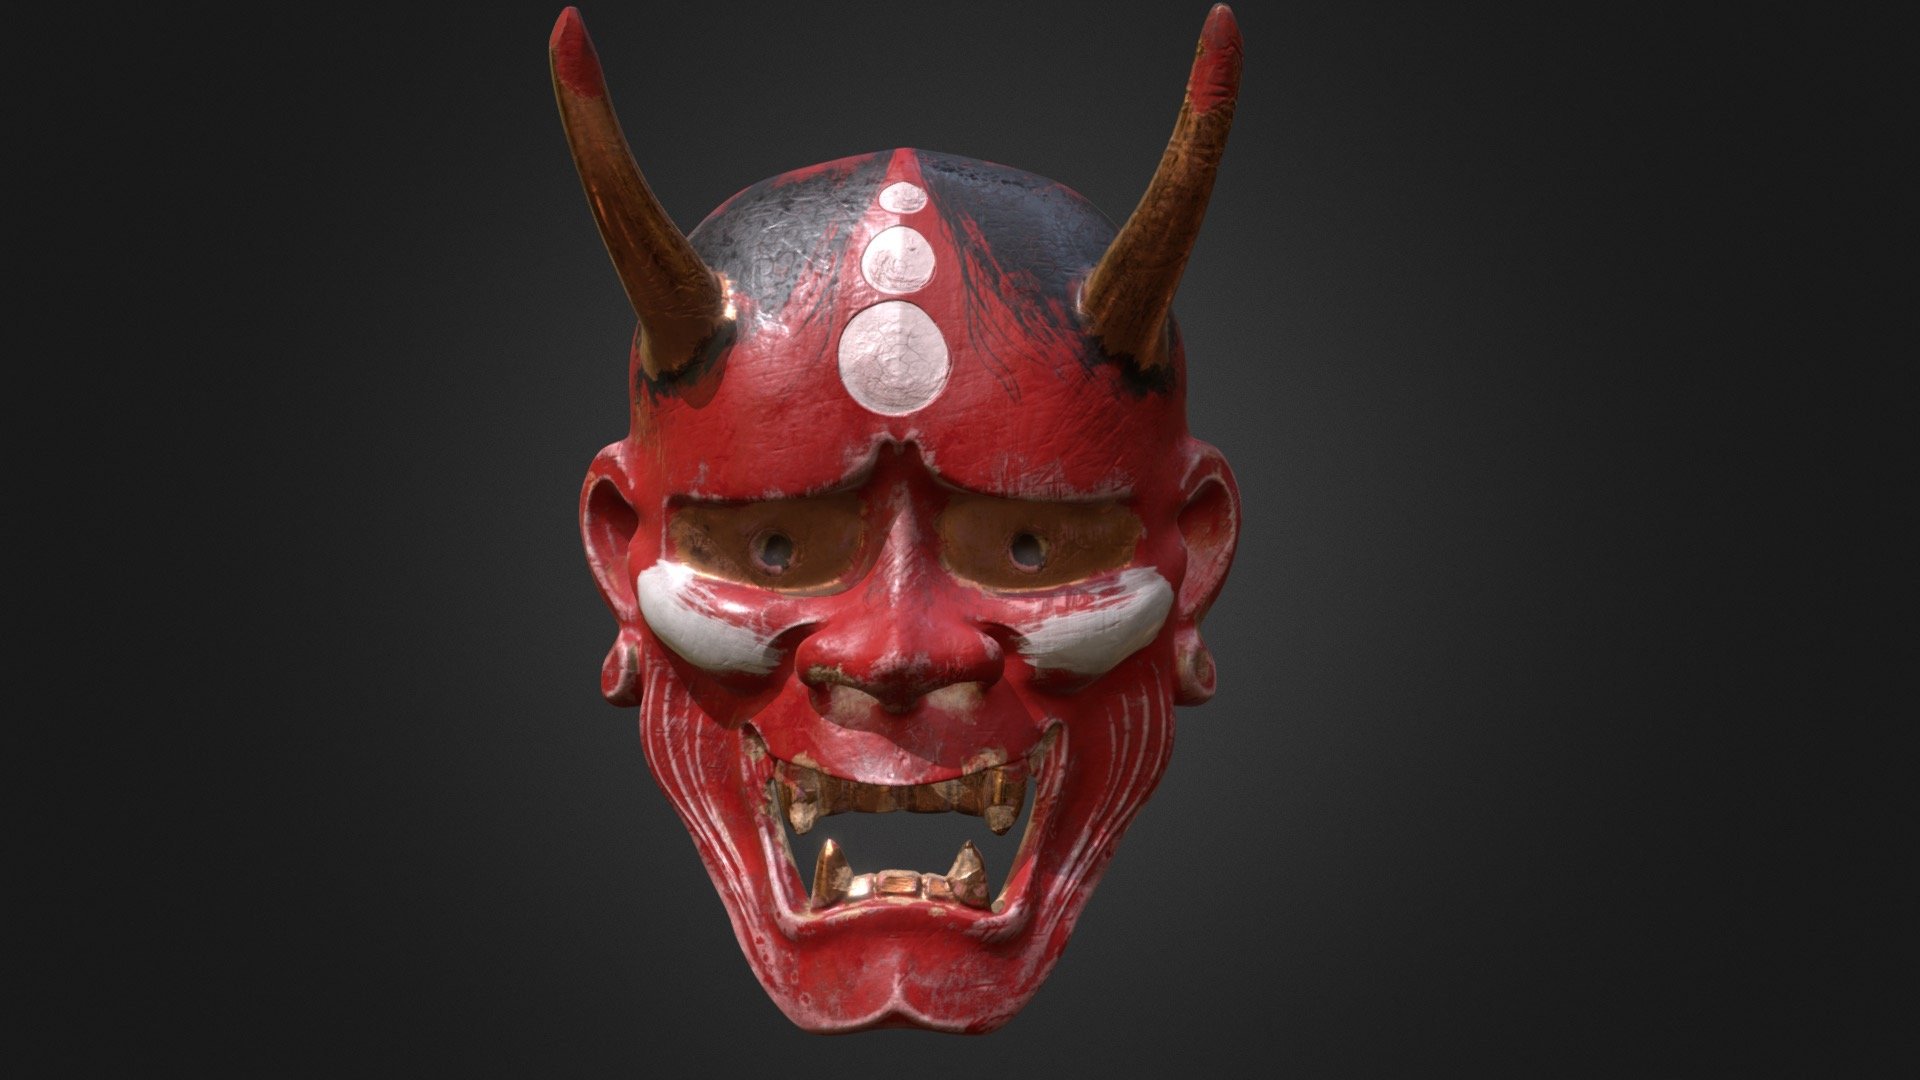 Free model of a traditional japanese mask. I sculpt it in Zbrush and texture it in substance painter.
You can see my work here : https://www.behance.net/romainvaysse - Japanese Mask - Download Free 3D model by Romain Vaysse (@redshell) 3d model